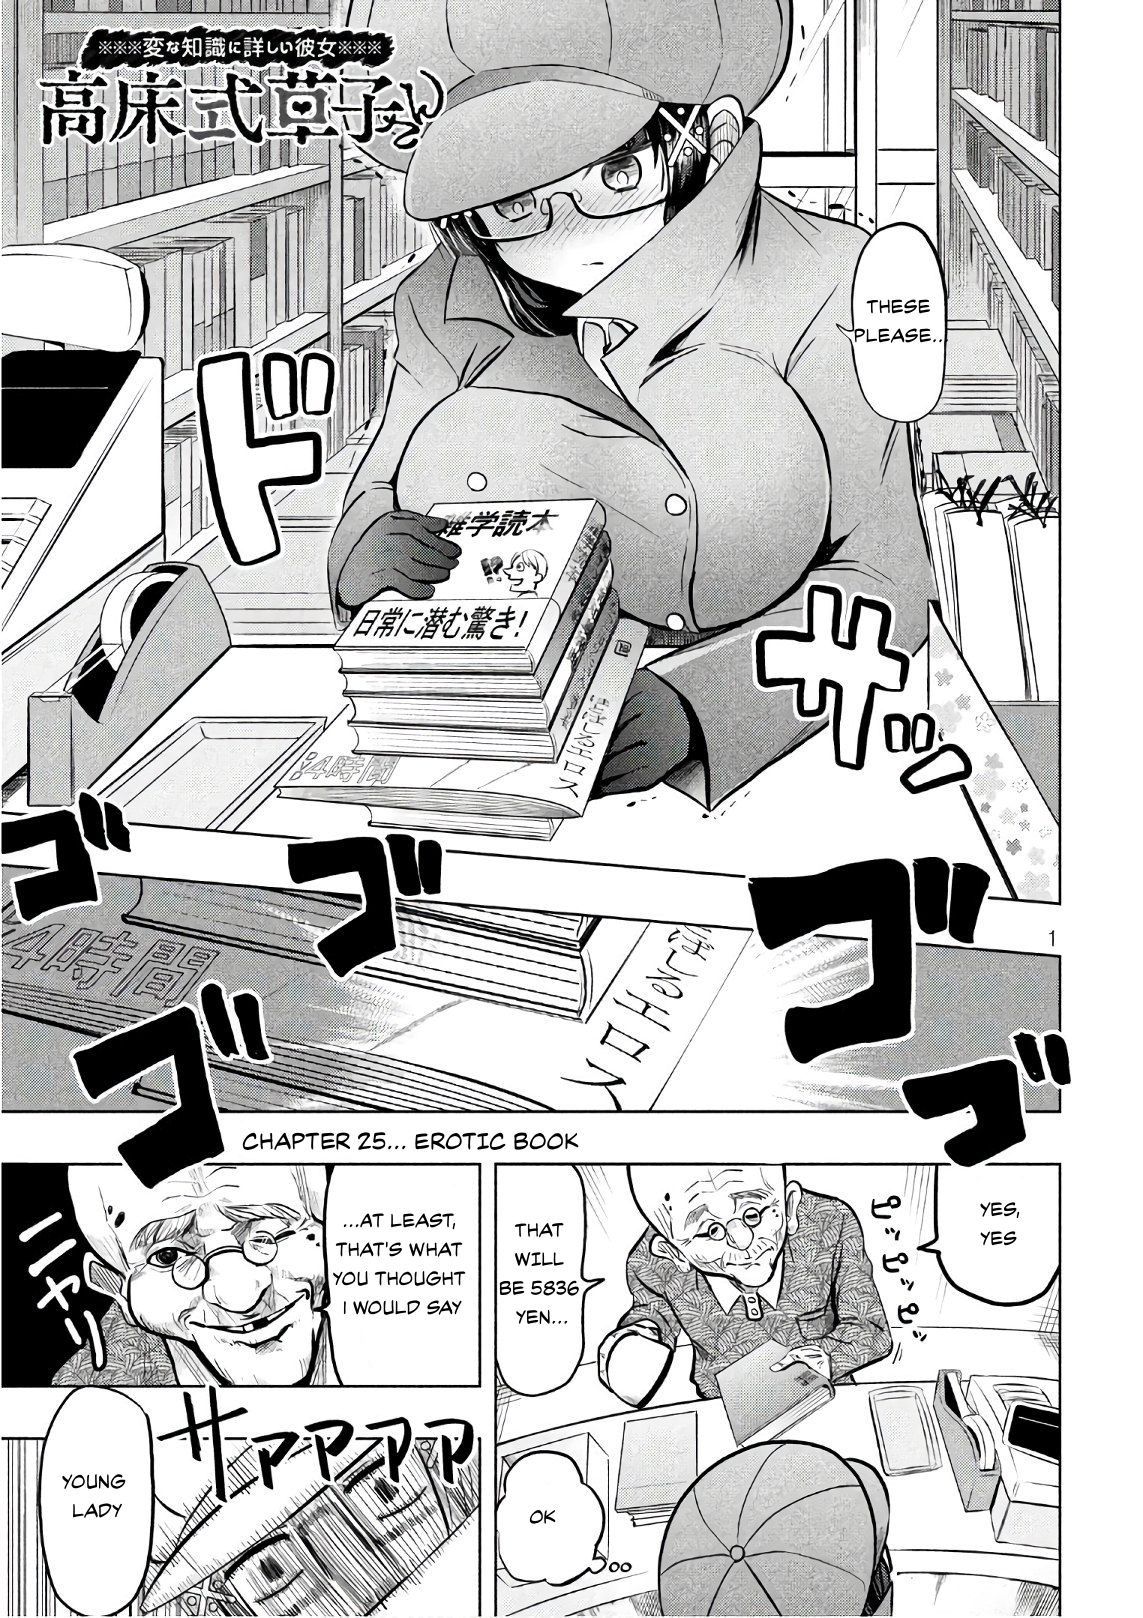 A Girl Who Is Very Well-Informed About Weird Knowledge, Takayukashiki Souko-San Chapter 25 #1